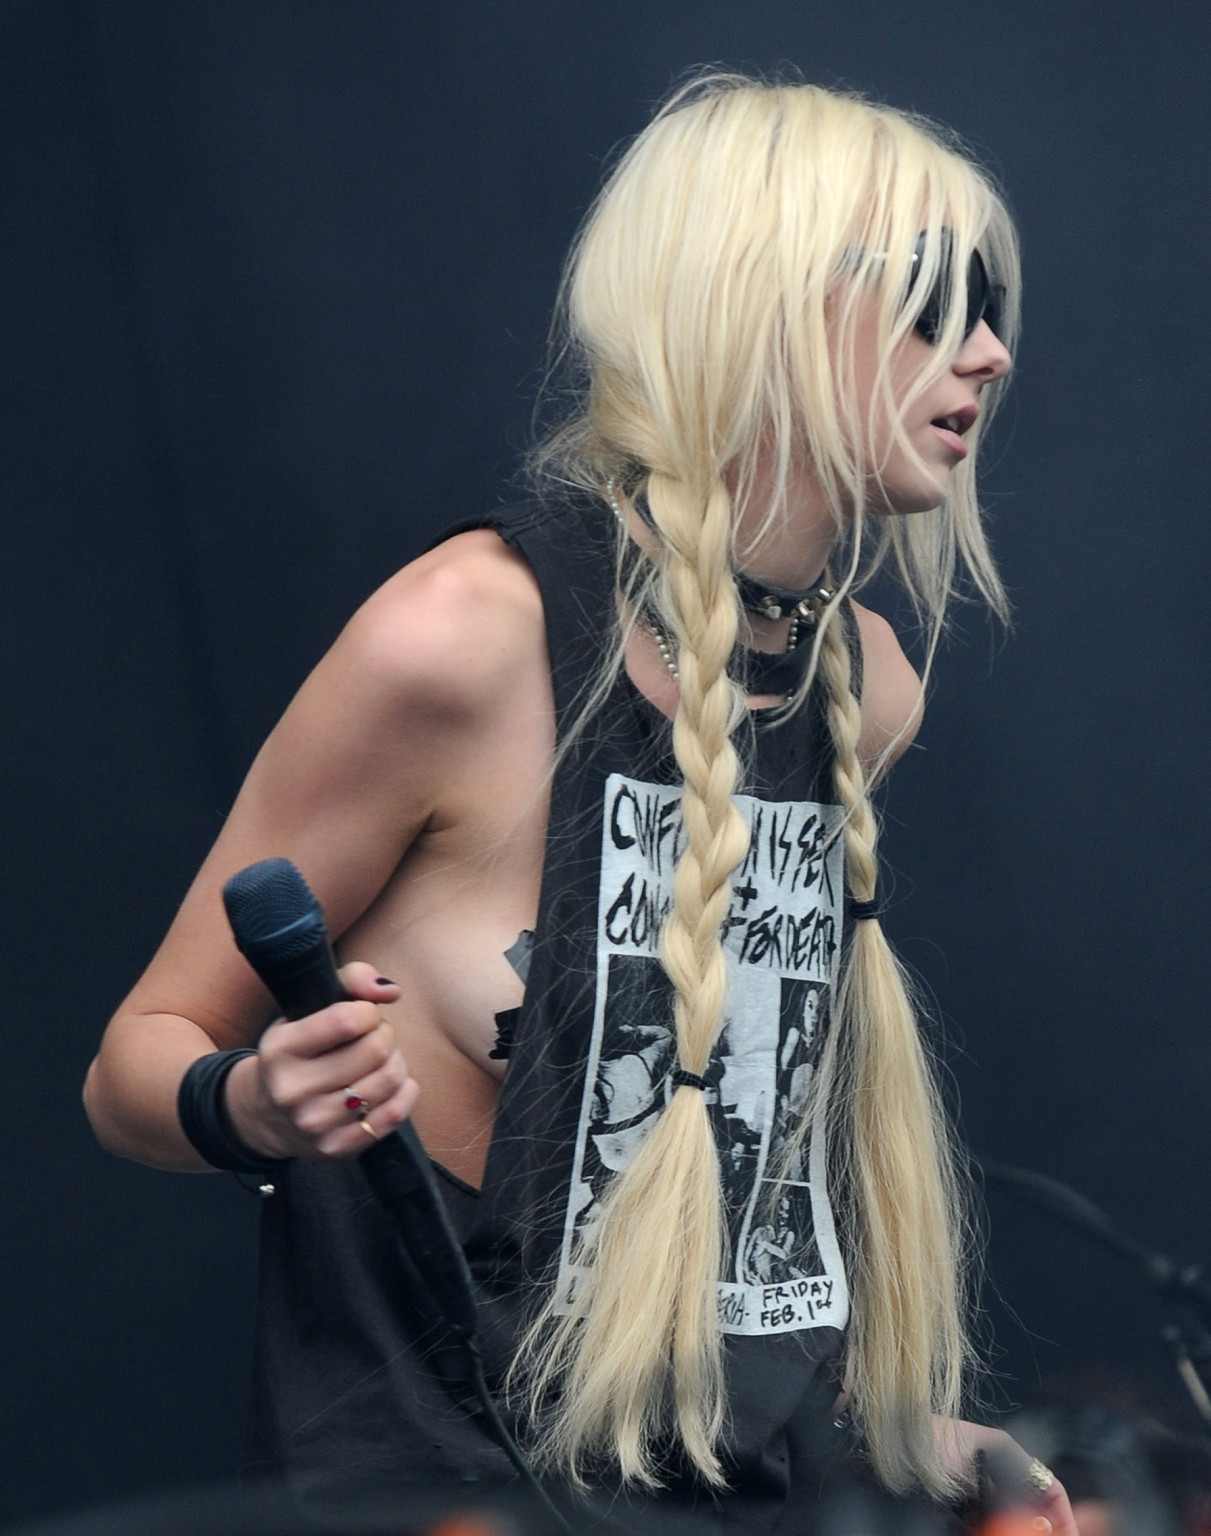 Taylor Momsen performing with taped nipples on 2011 Download Festival #75300014